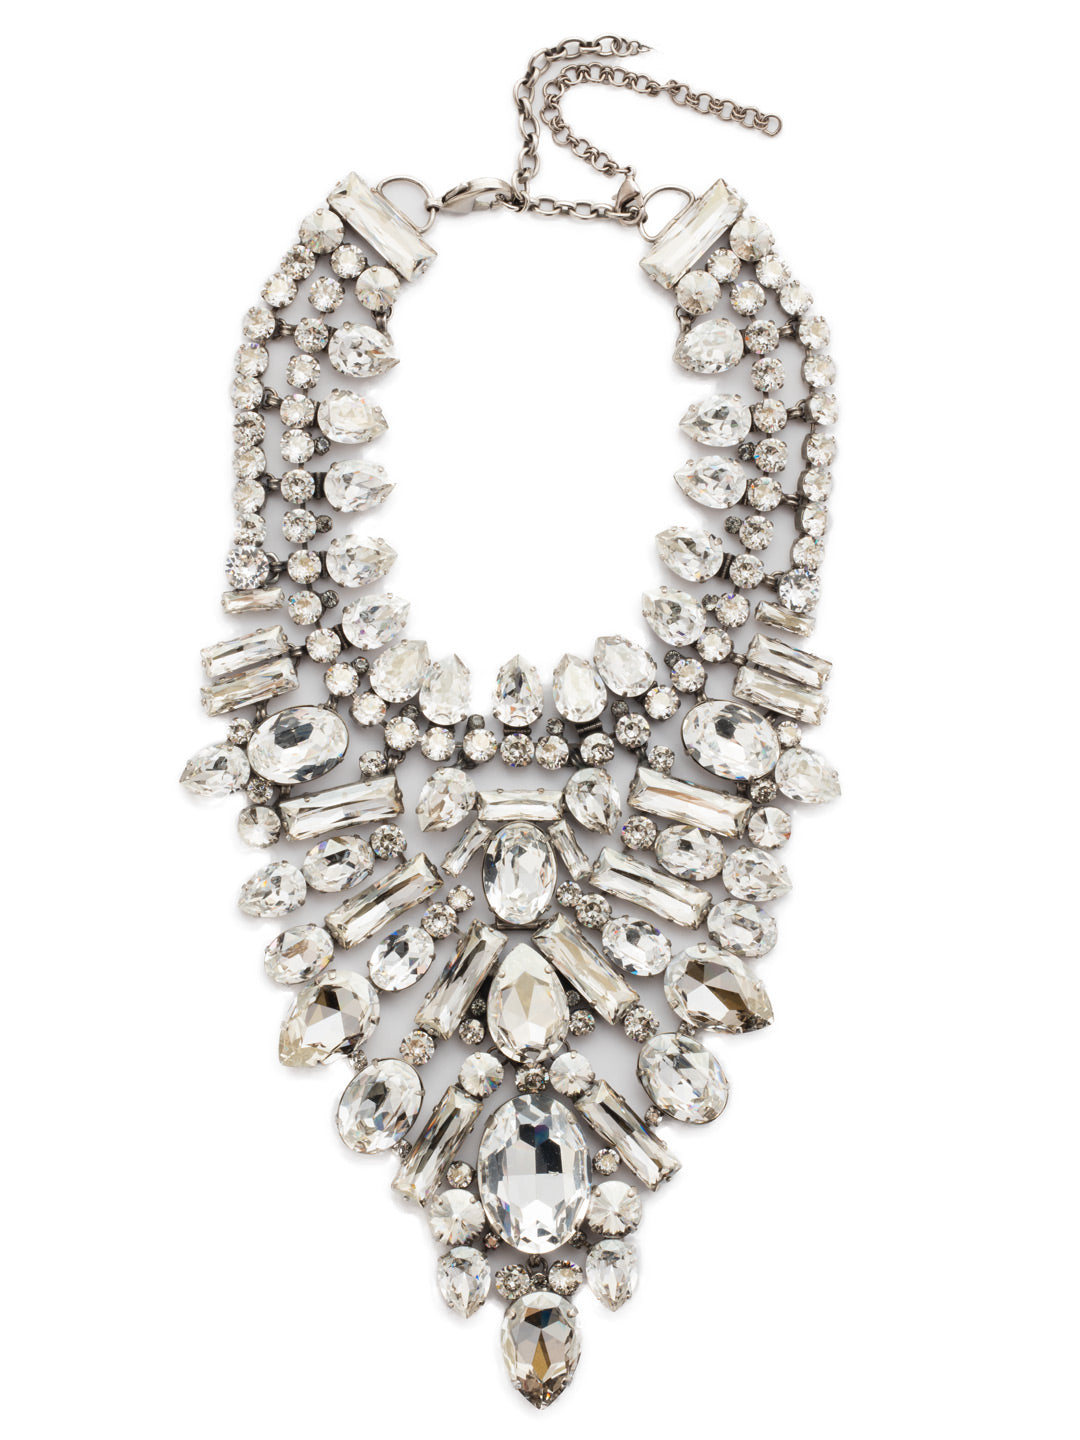 Crystal Cluster Statement Necklace - NSP80ASSSH - <p>A large cluster of unquie crystals creates an extrodianry statement necklace. The sparkle from the rows of crystals are eye-catching. From Sorrelli's Silver Shade collection in our Antique Silver-tone finish.</p>